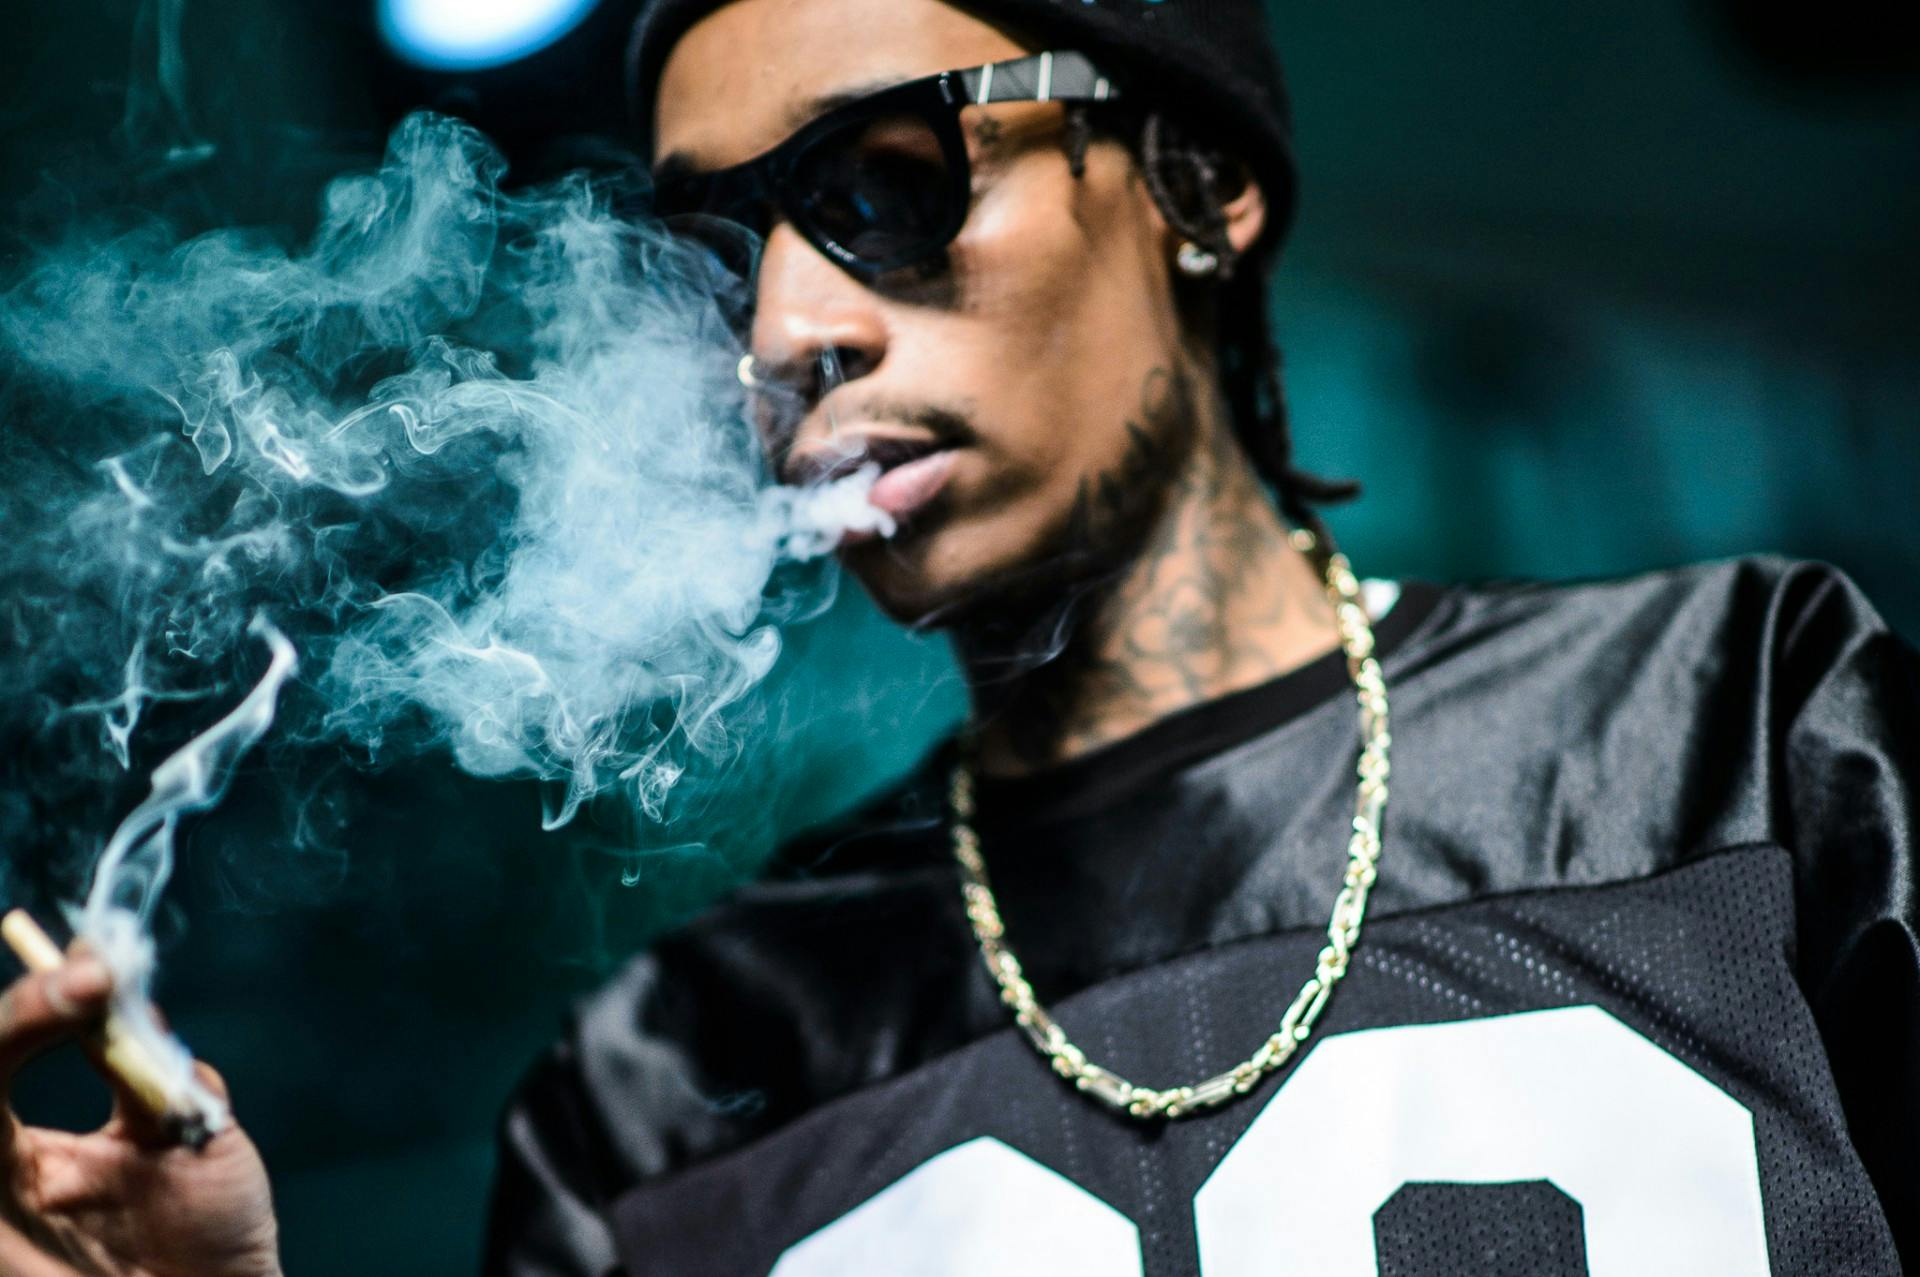 Wiz Khalifa kicks Shiggy from dressing room for coughing fit during their smoke sesh.